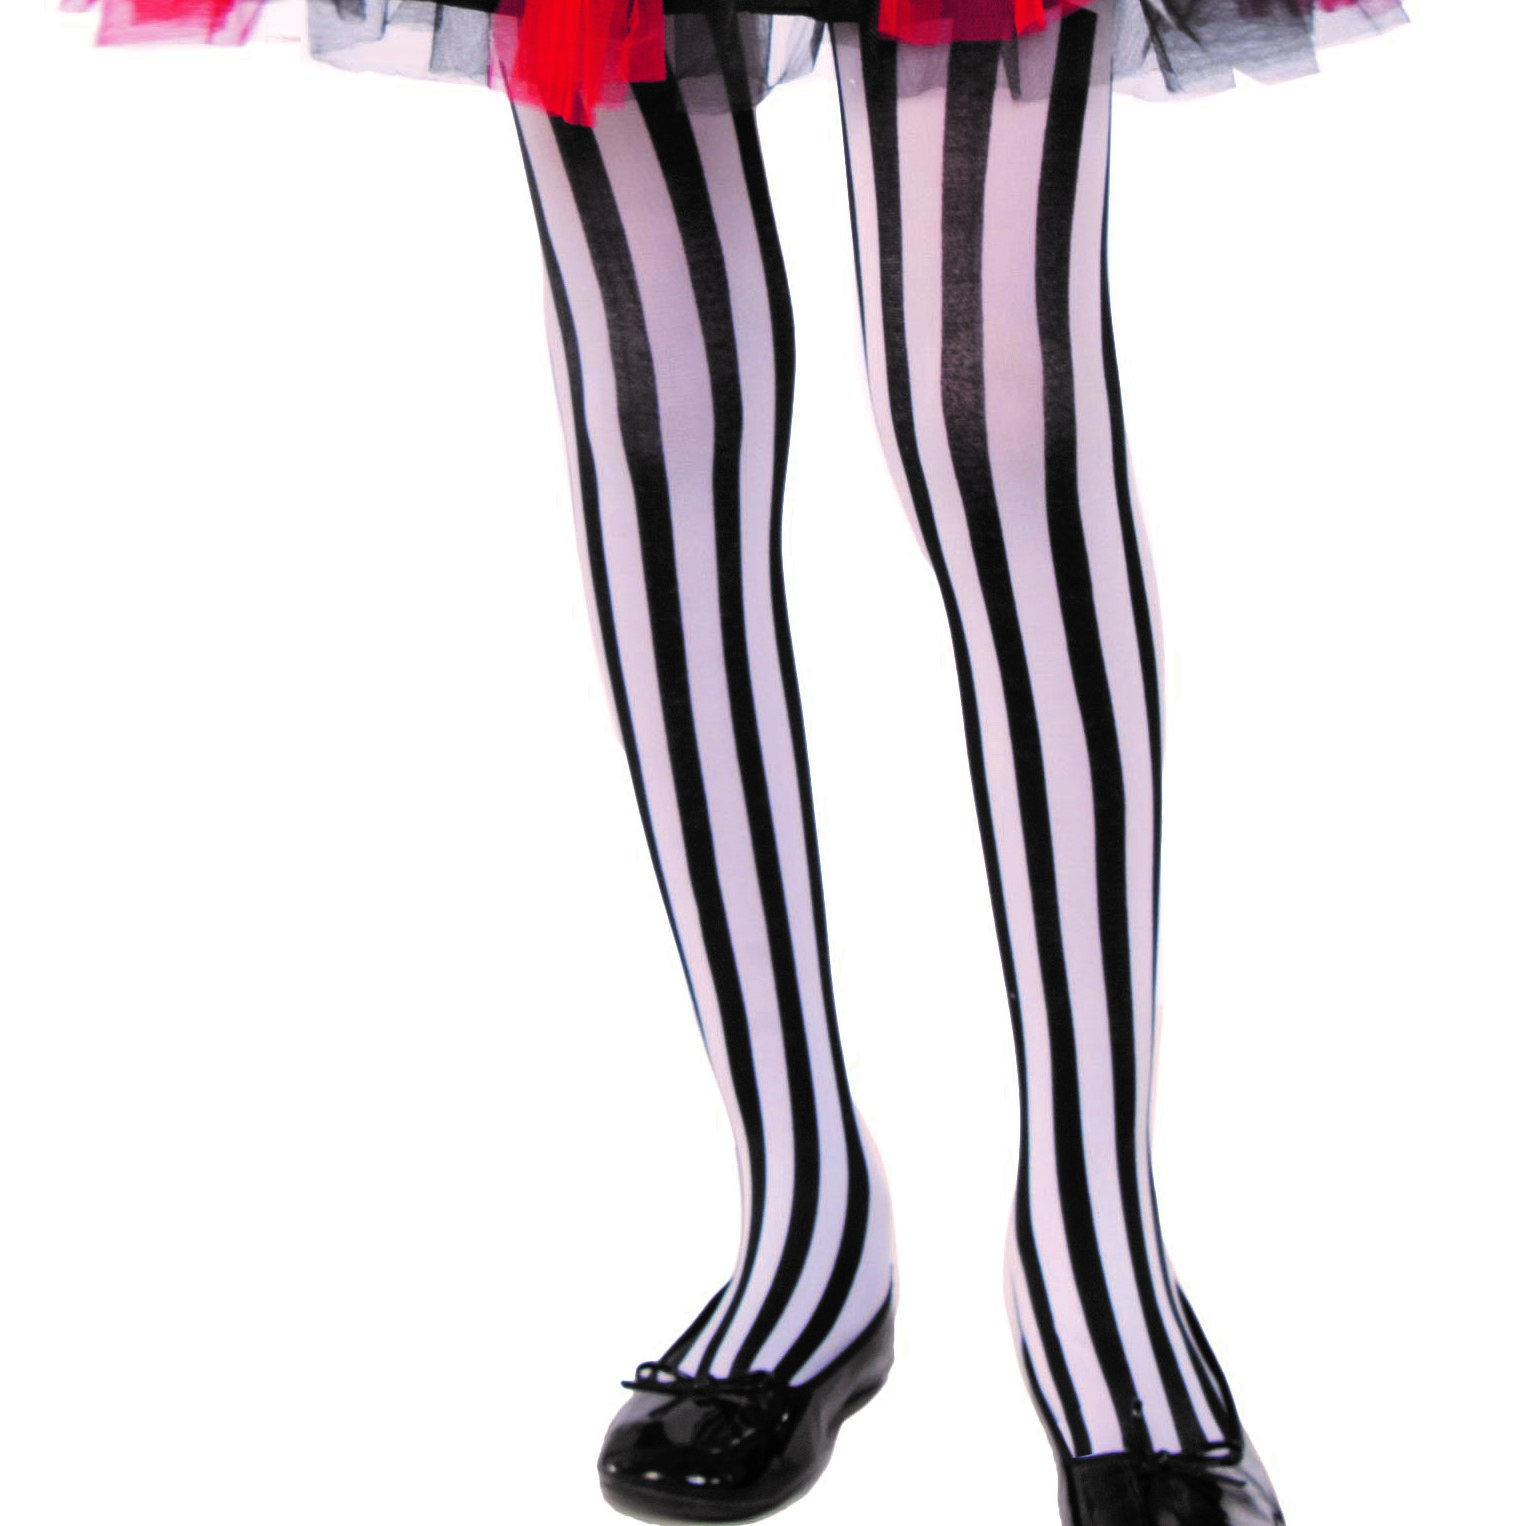 https://2bcostumes.com/wp-content/uploads/2021/08/78669-Striped-Tights-Blk-Wht.jpg